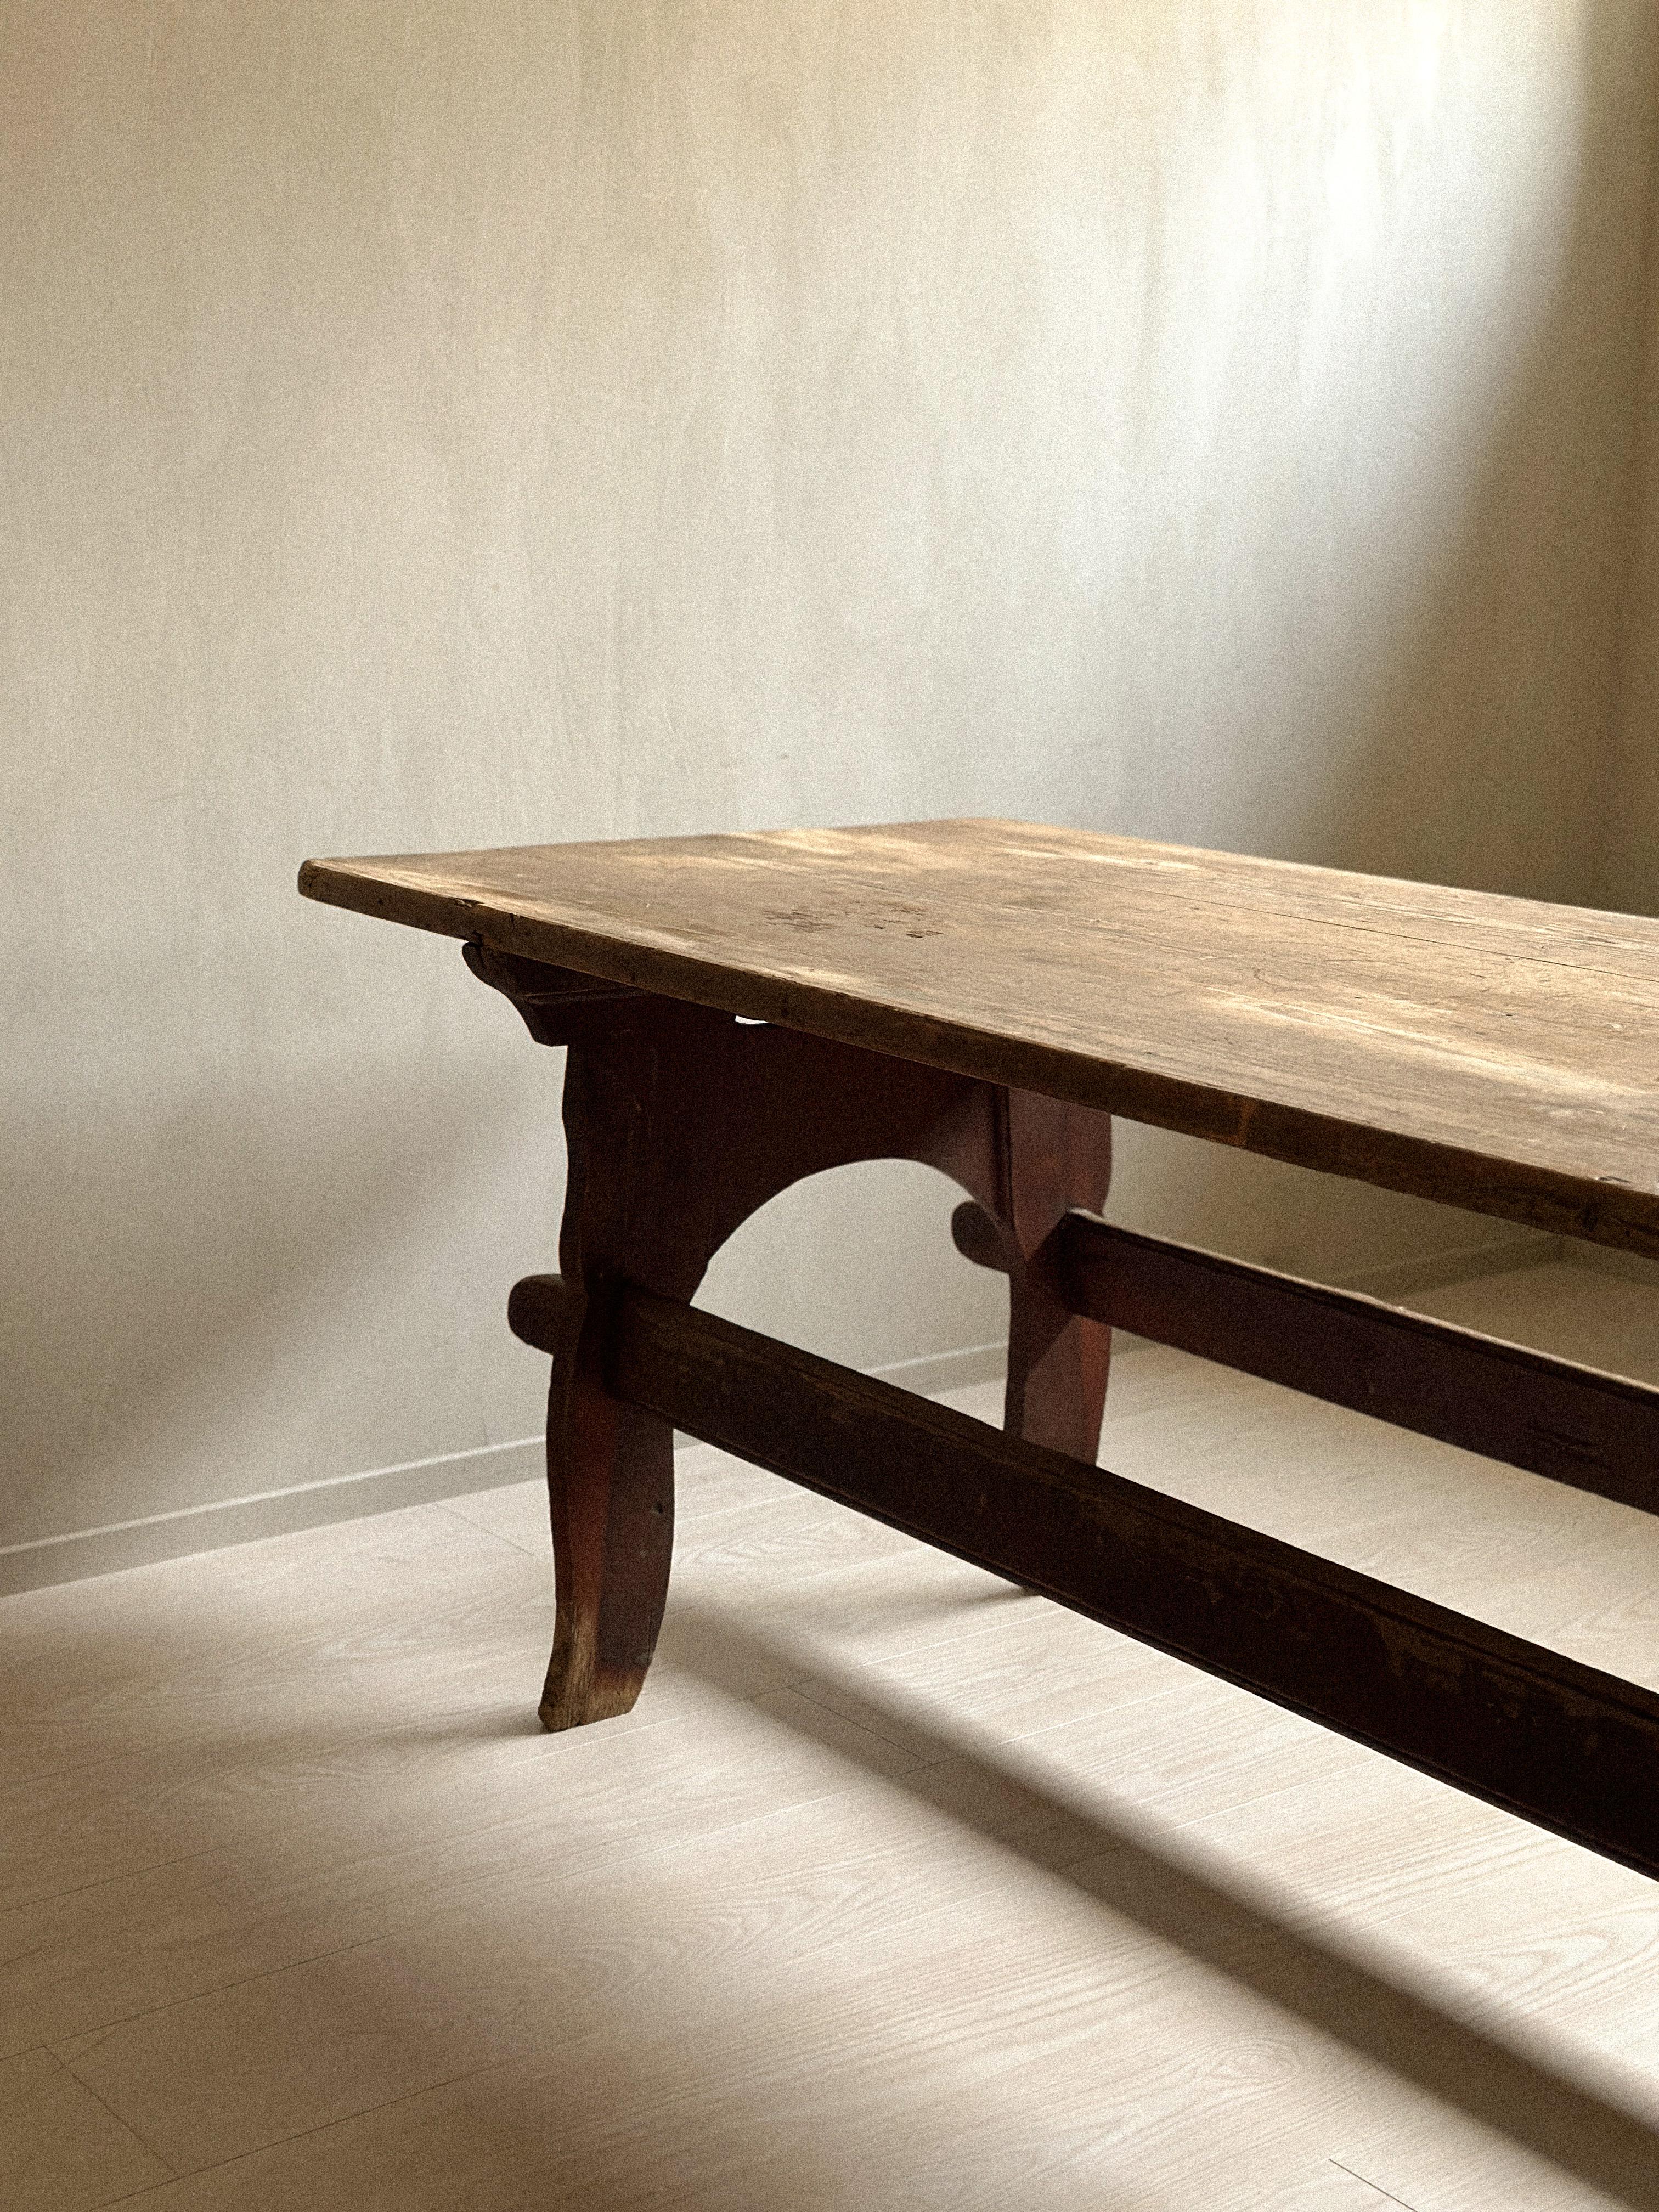 Antique Wabi Sabi Dining Table or Desk, Anonymous, Scandinavia c. 1800s  In Good Condition For Sale In Hønefoss, 30